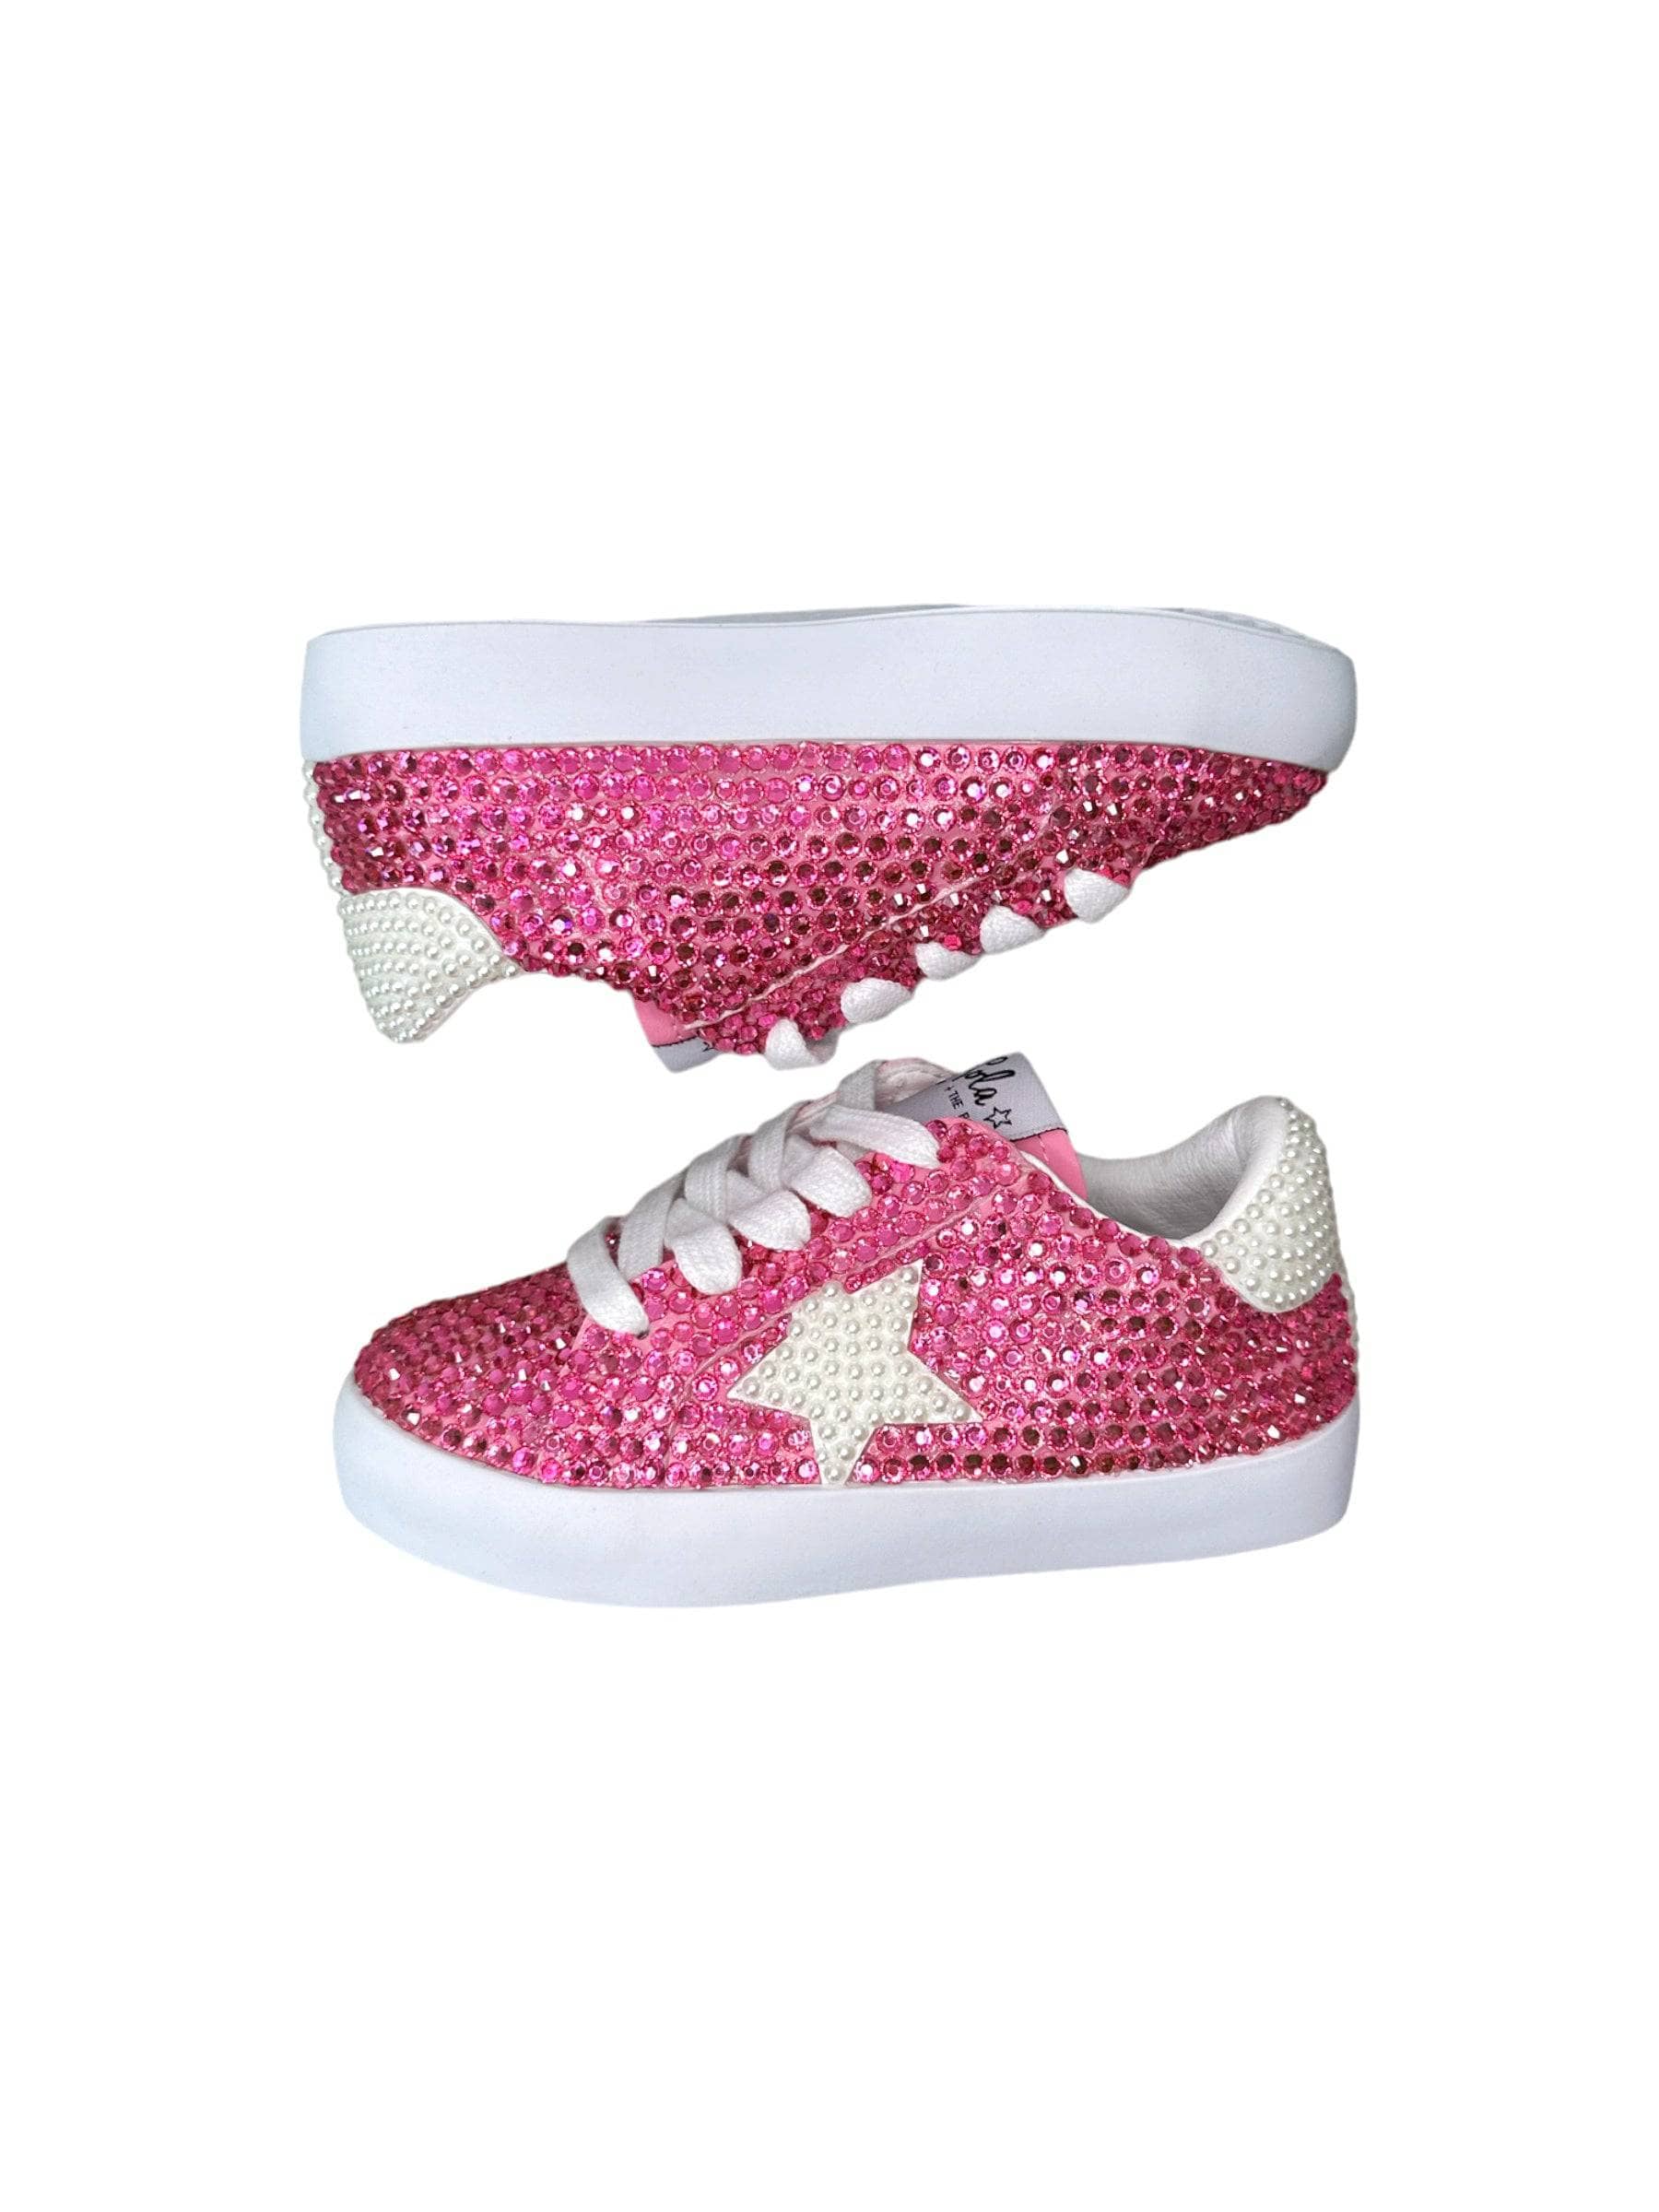 Sparkly sneakers